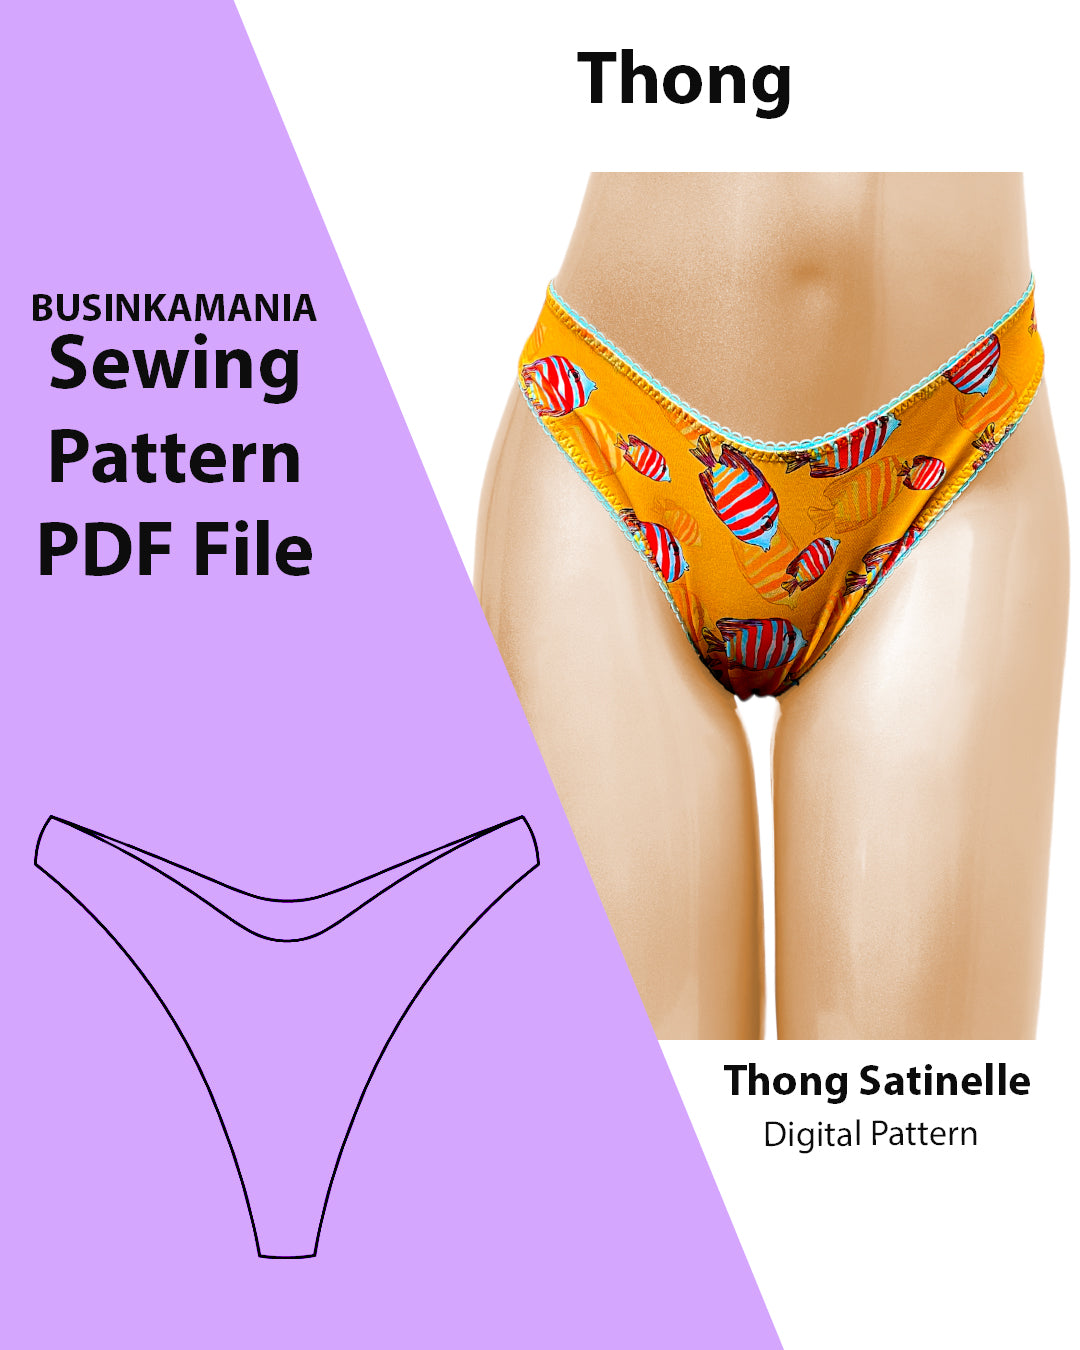 String Thong Lingerie Digital Sewing Pattern - Sew Your Dream Lingerie –  BusinkaMania